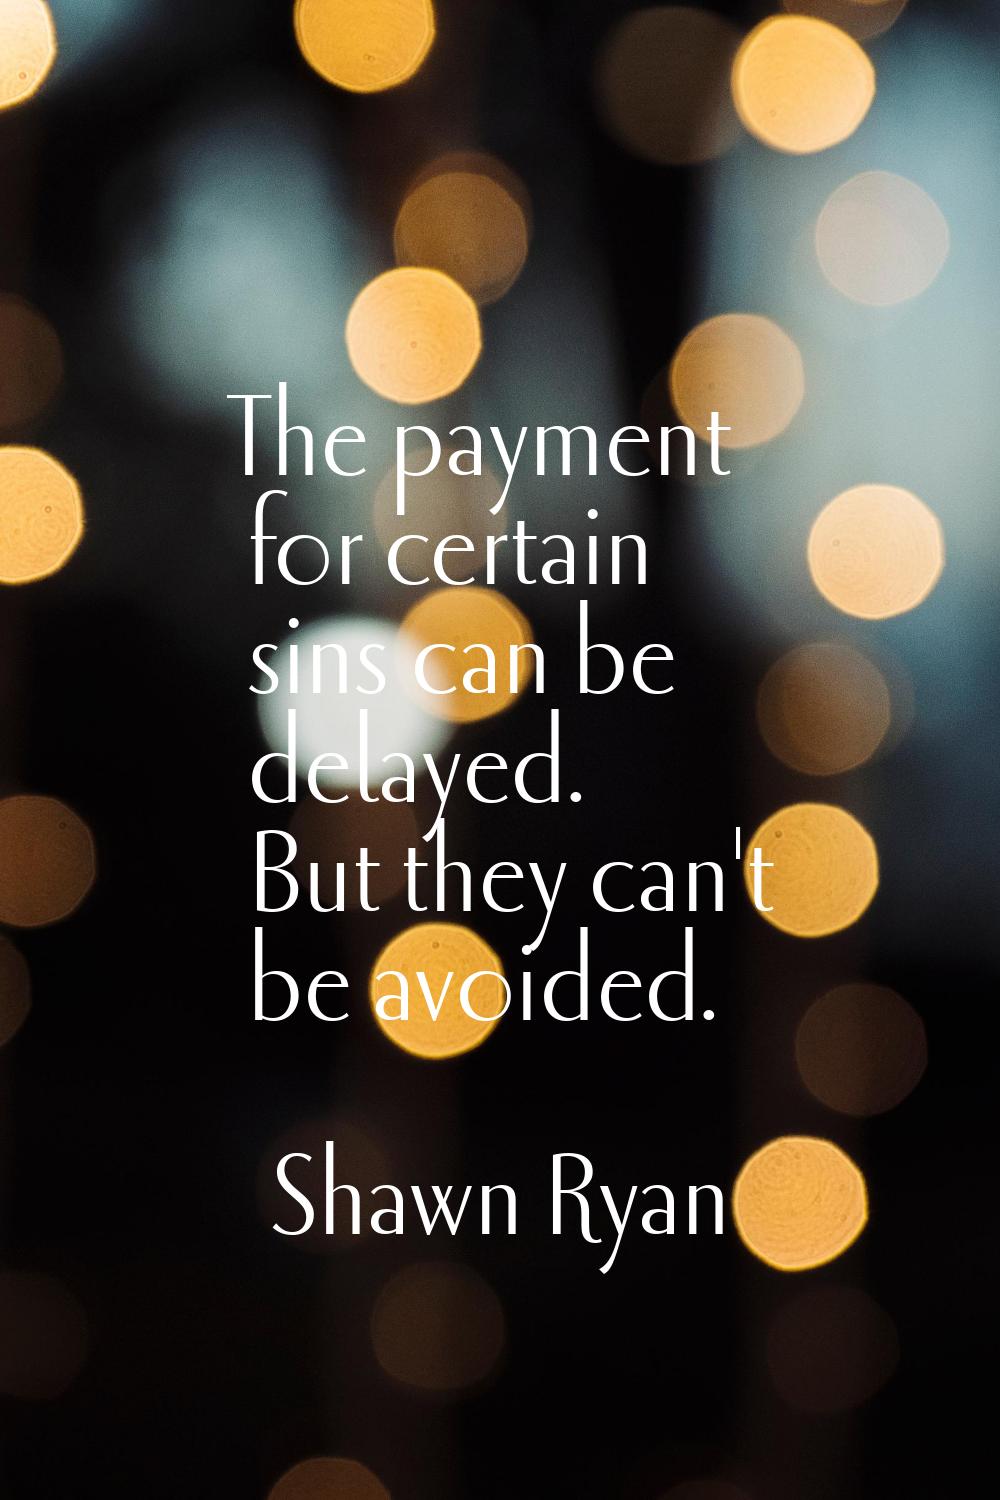 The payment for certain sins can be delayed. But they can't be avoided.